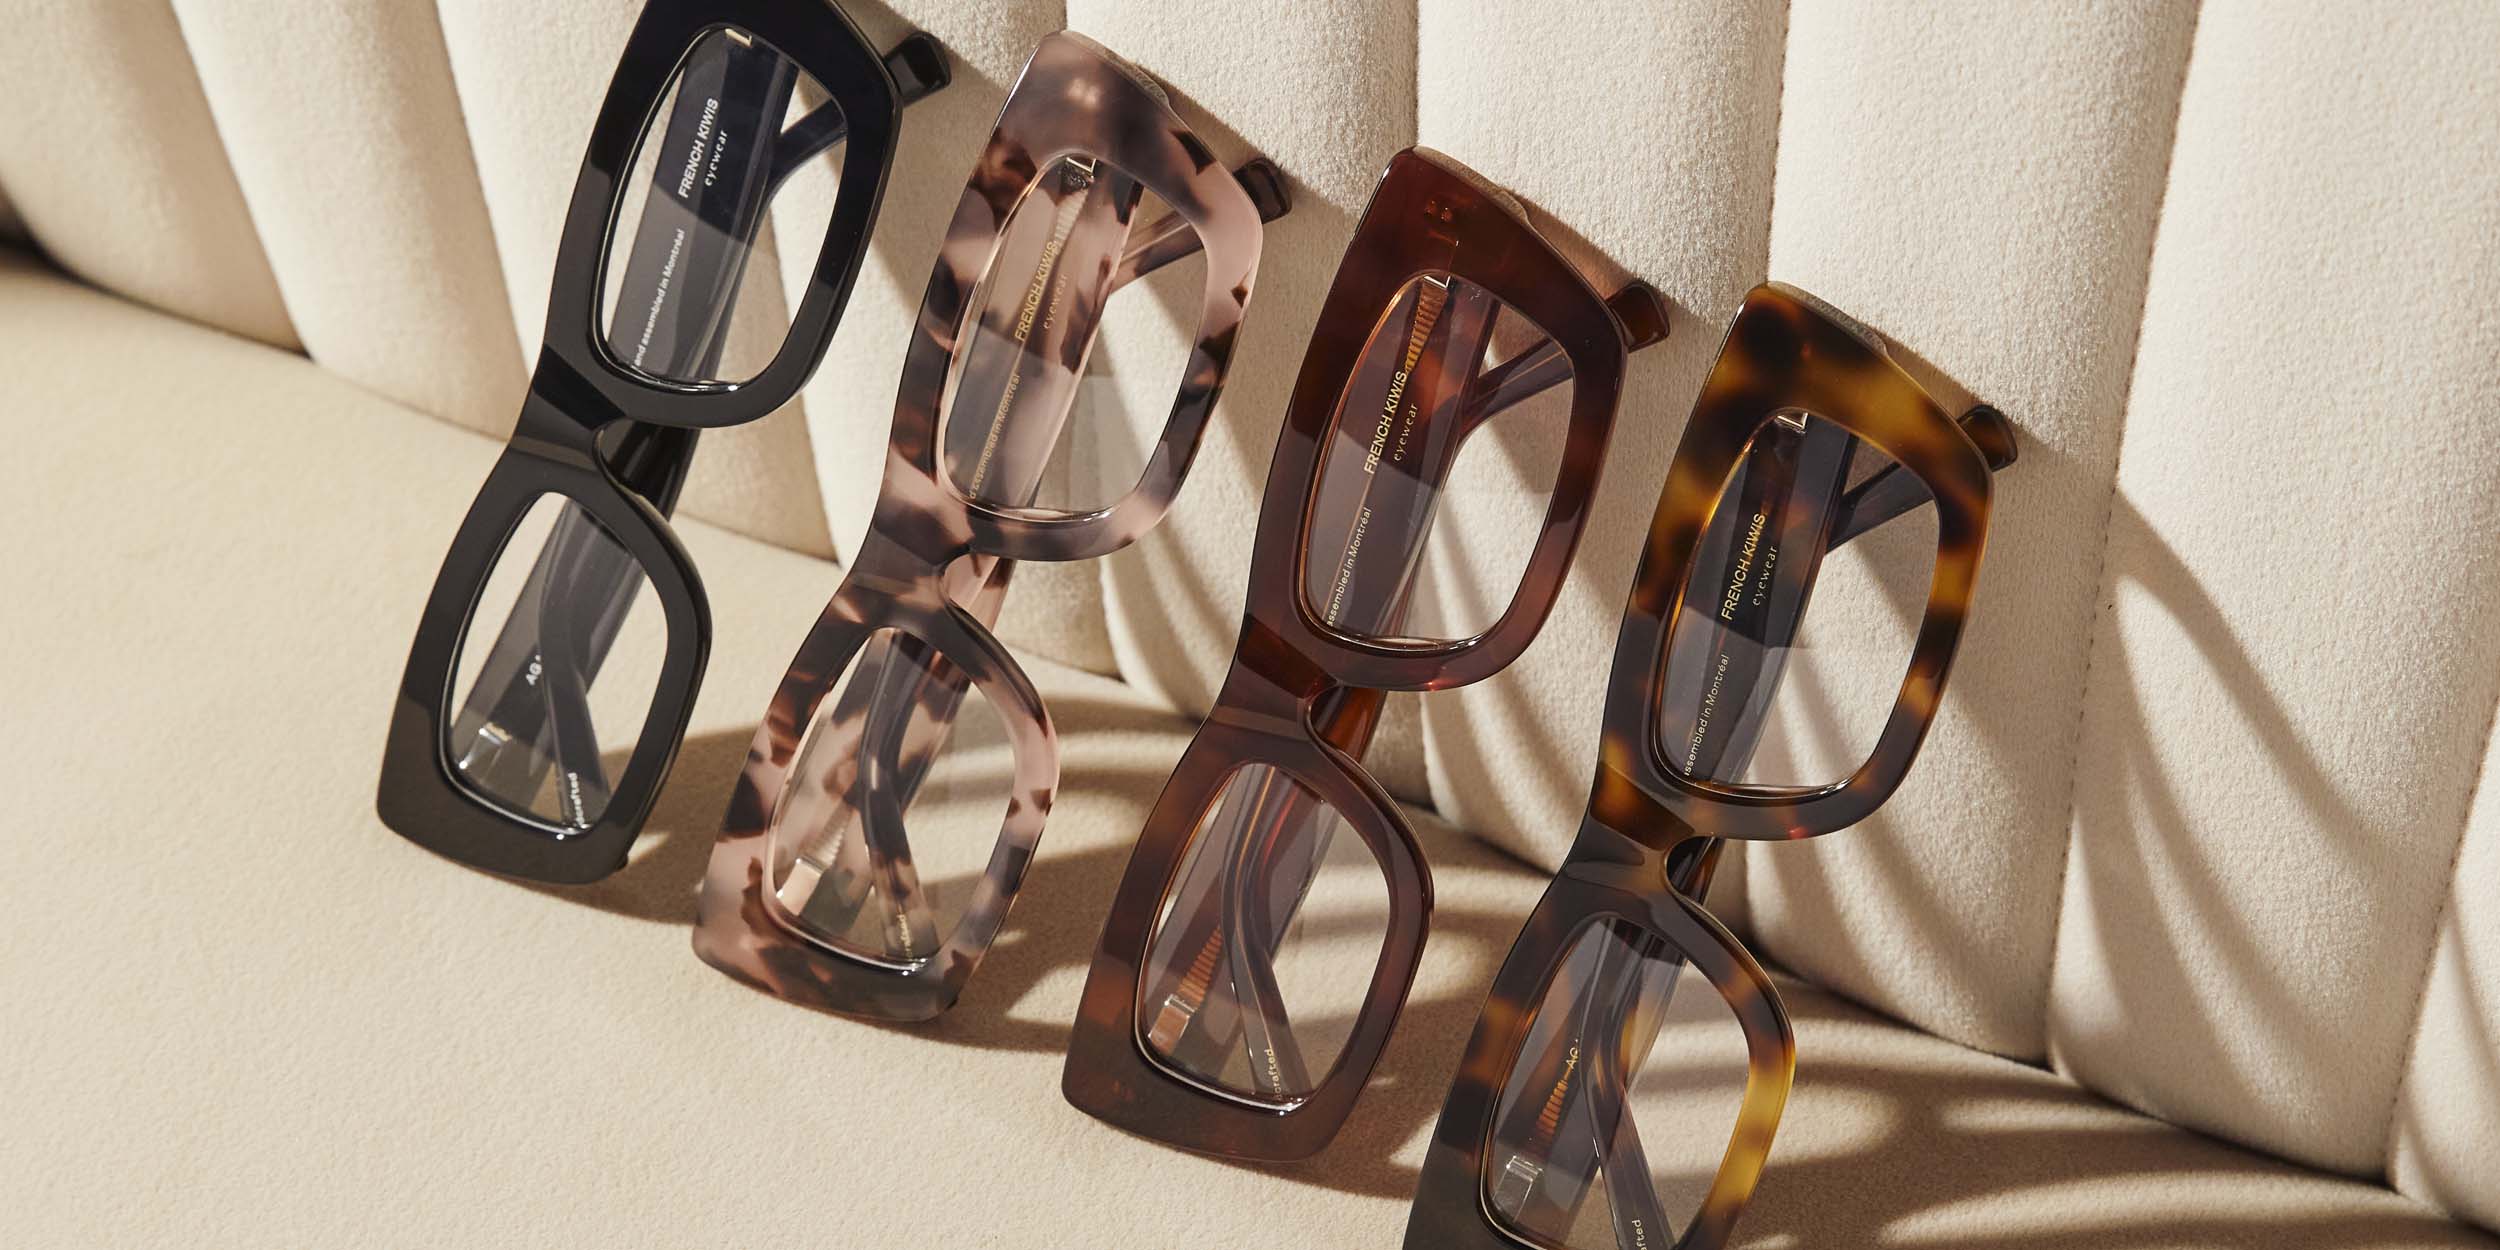 Photo Details of Agathe Grey Tortoise Reading Glasses in a room